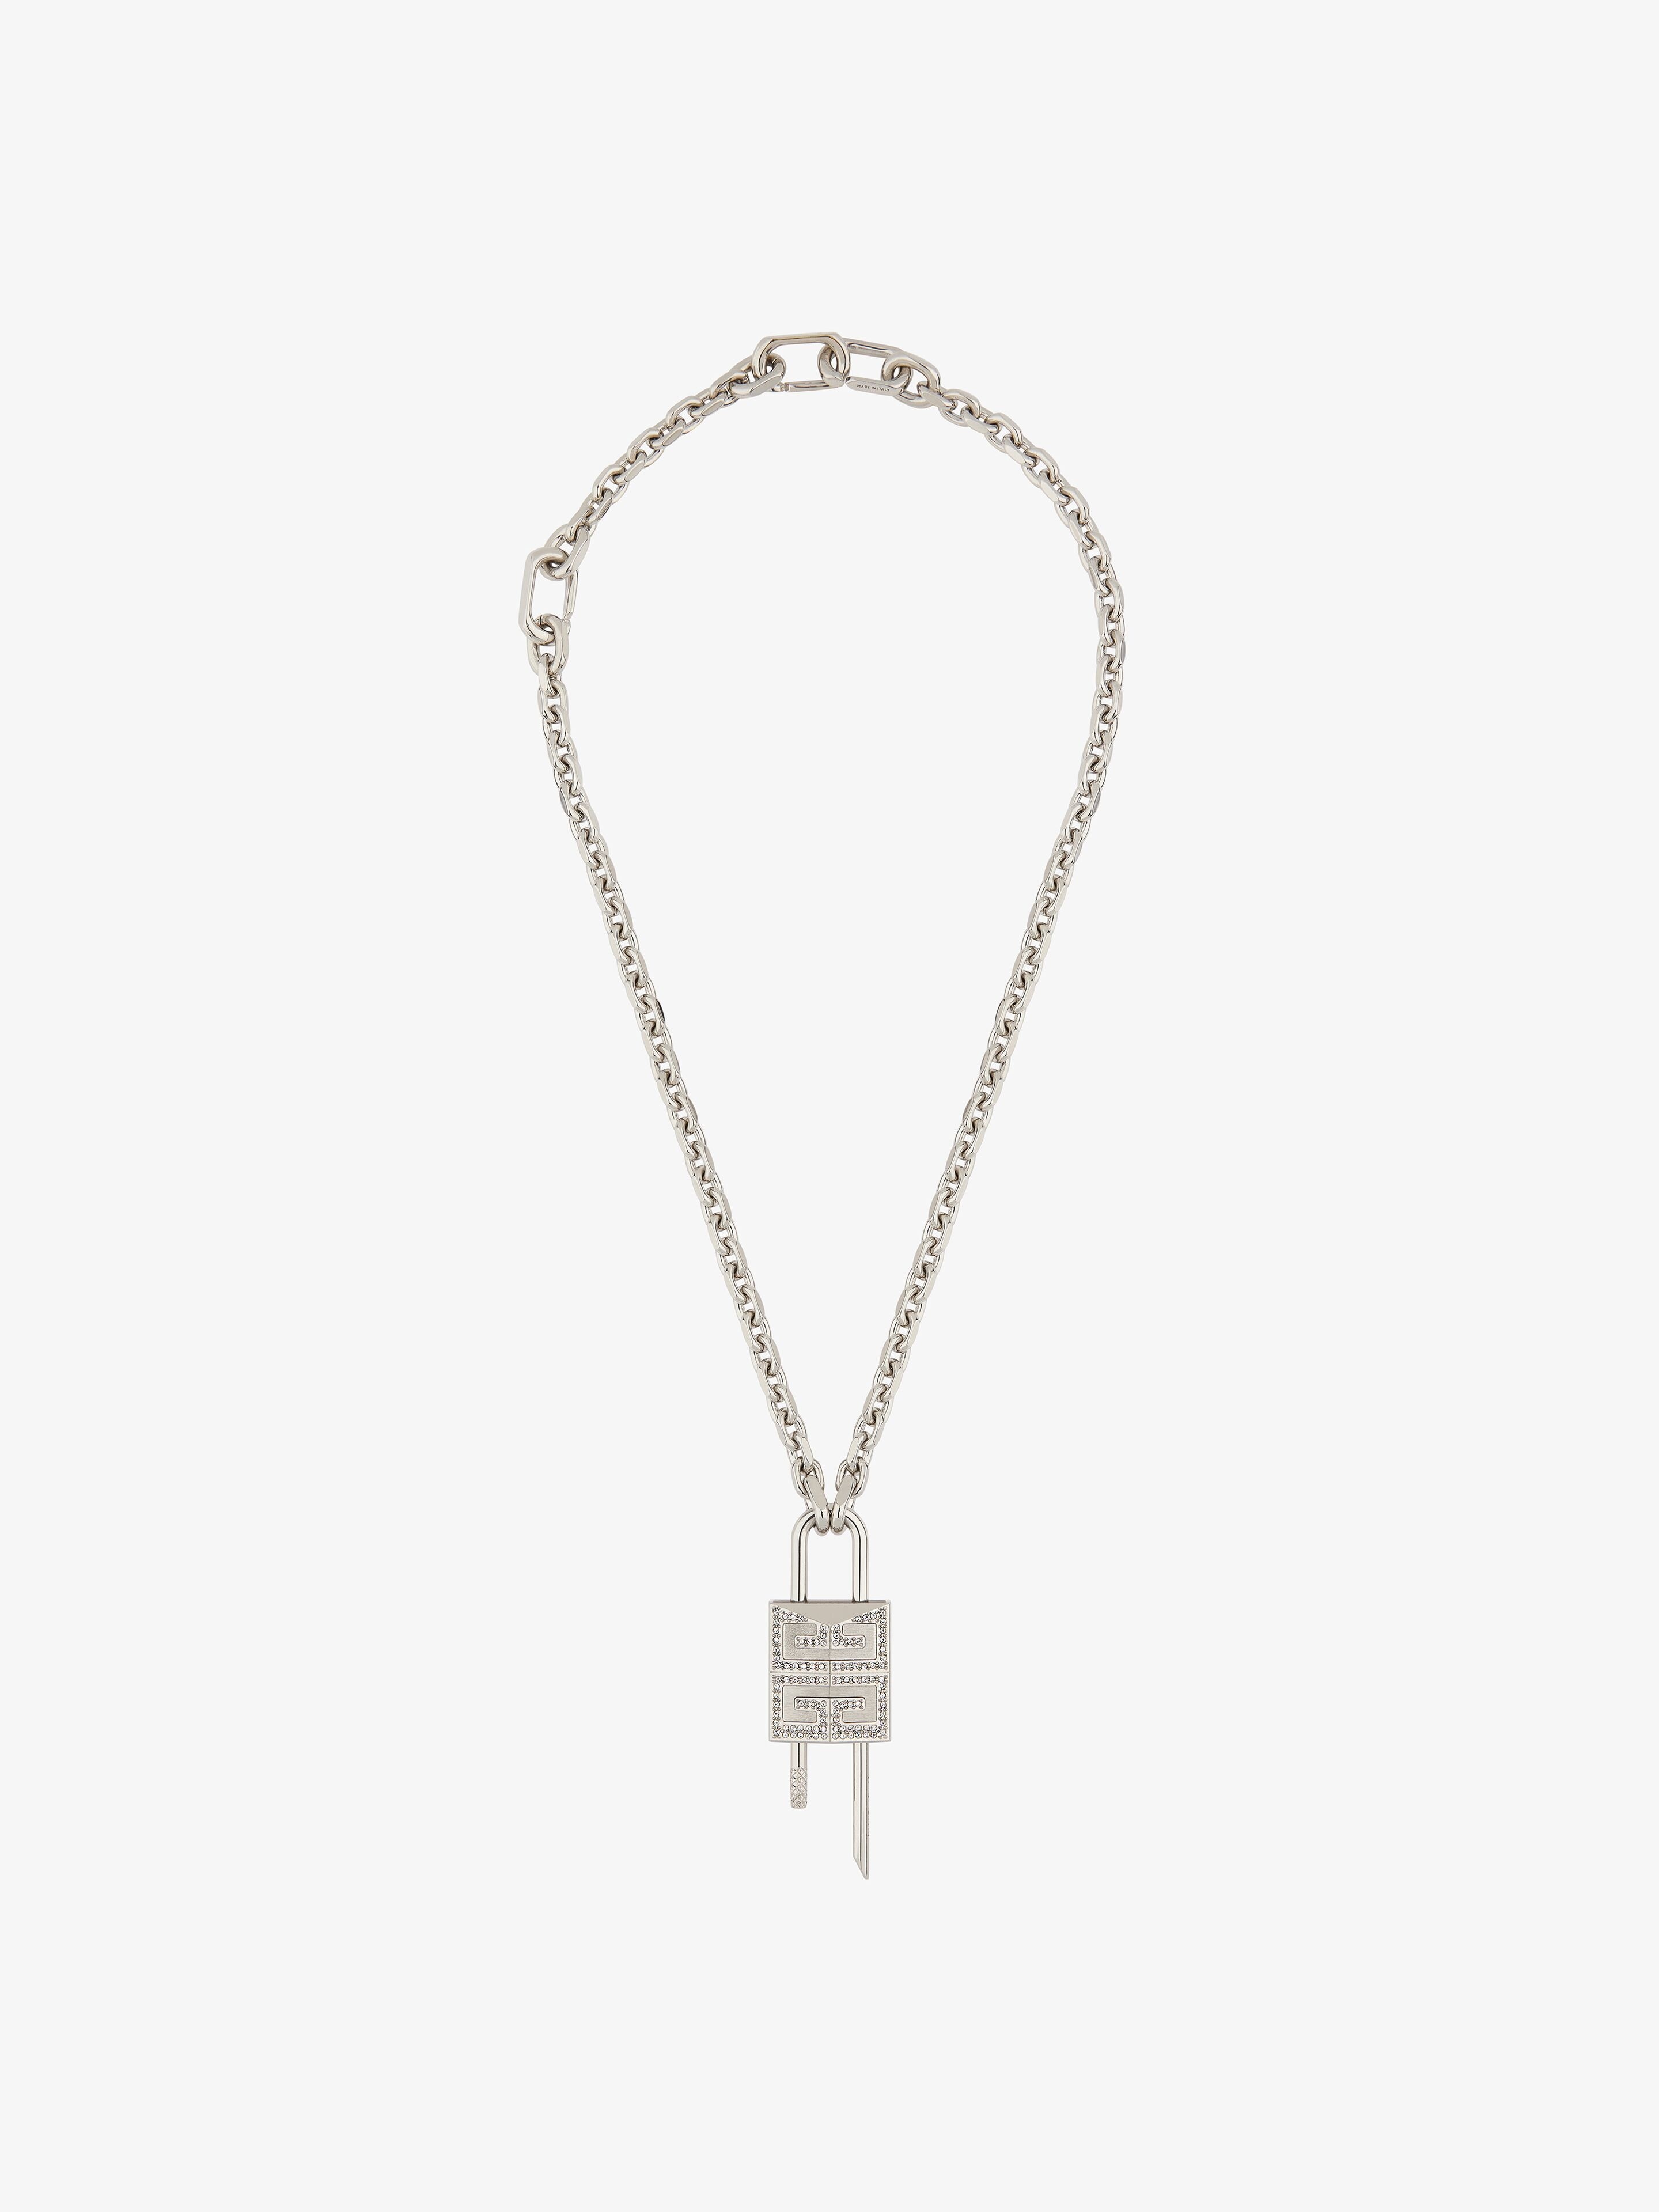 SMALL LOCK NECKLACE IN METAL WITH CRYSTALS - 1